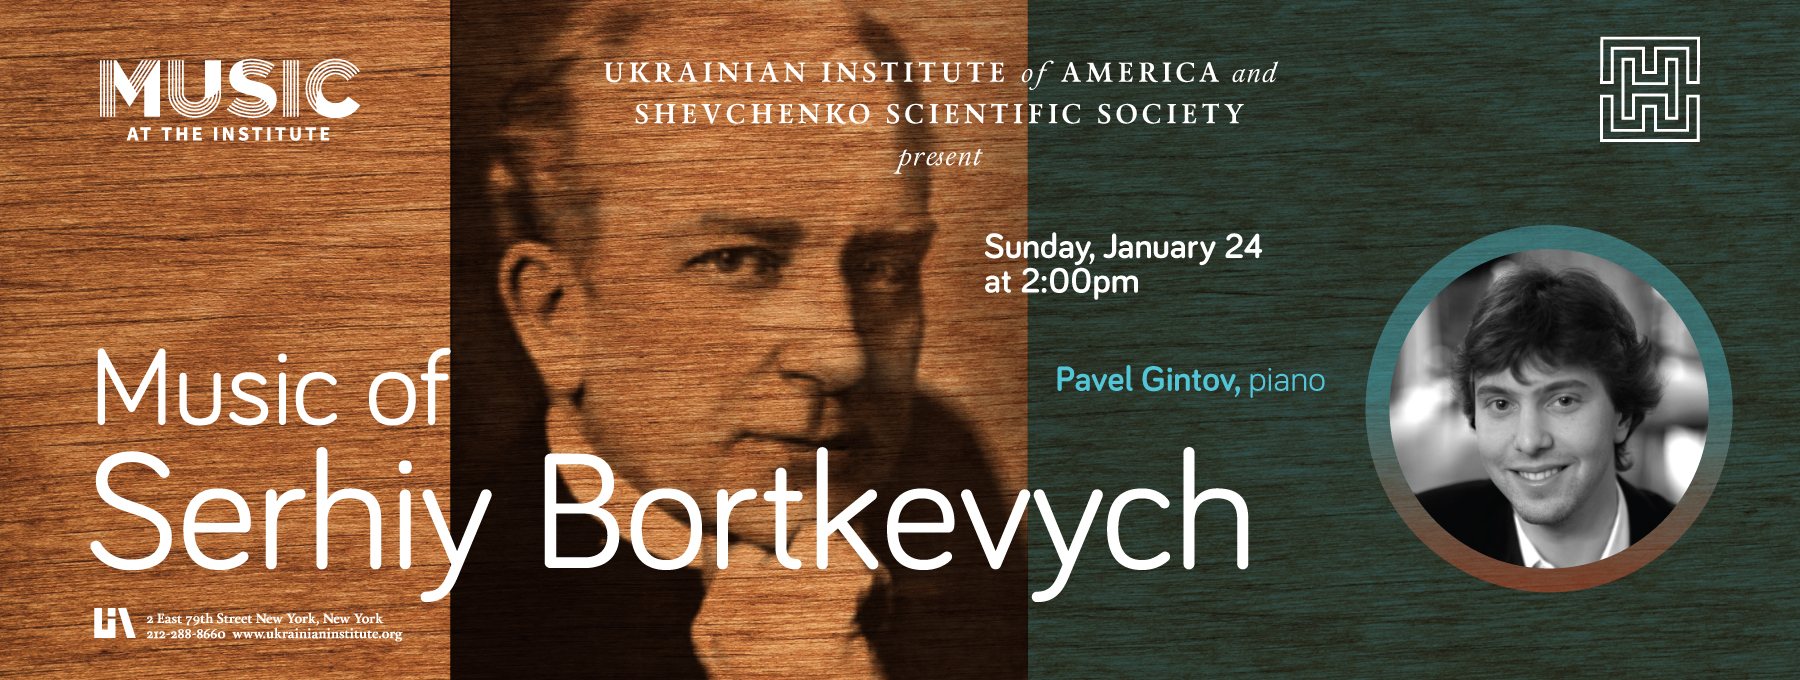 Poster for Music of Serhiy Bortkevych event